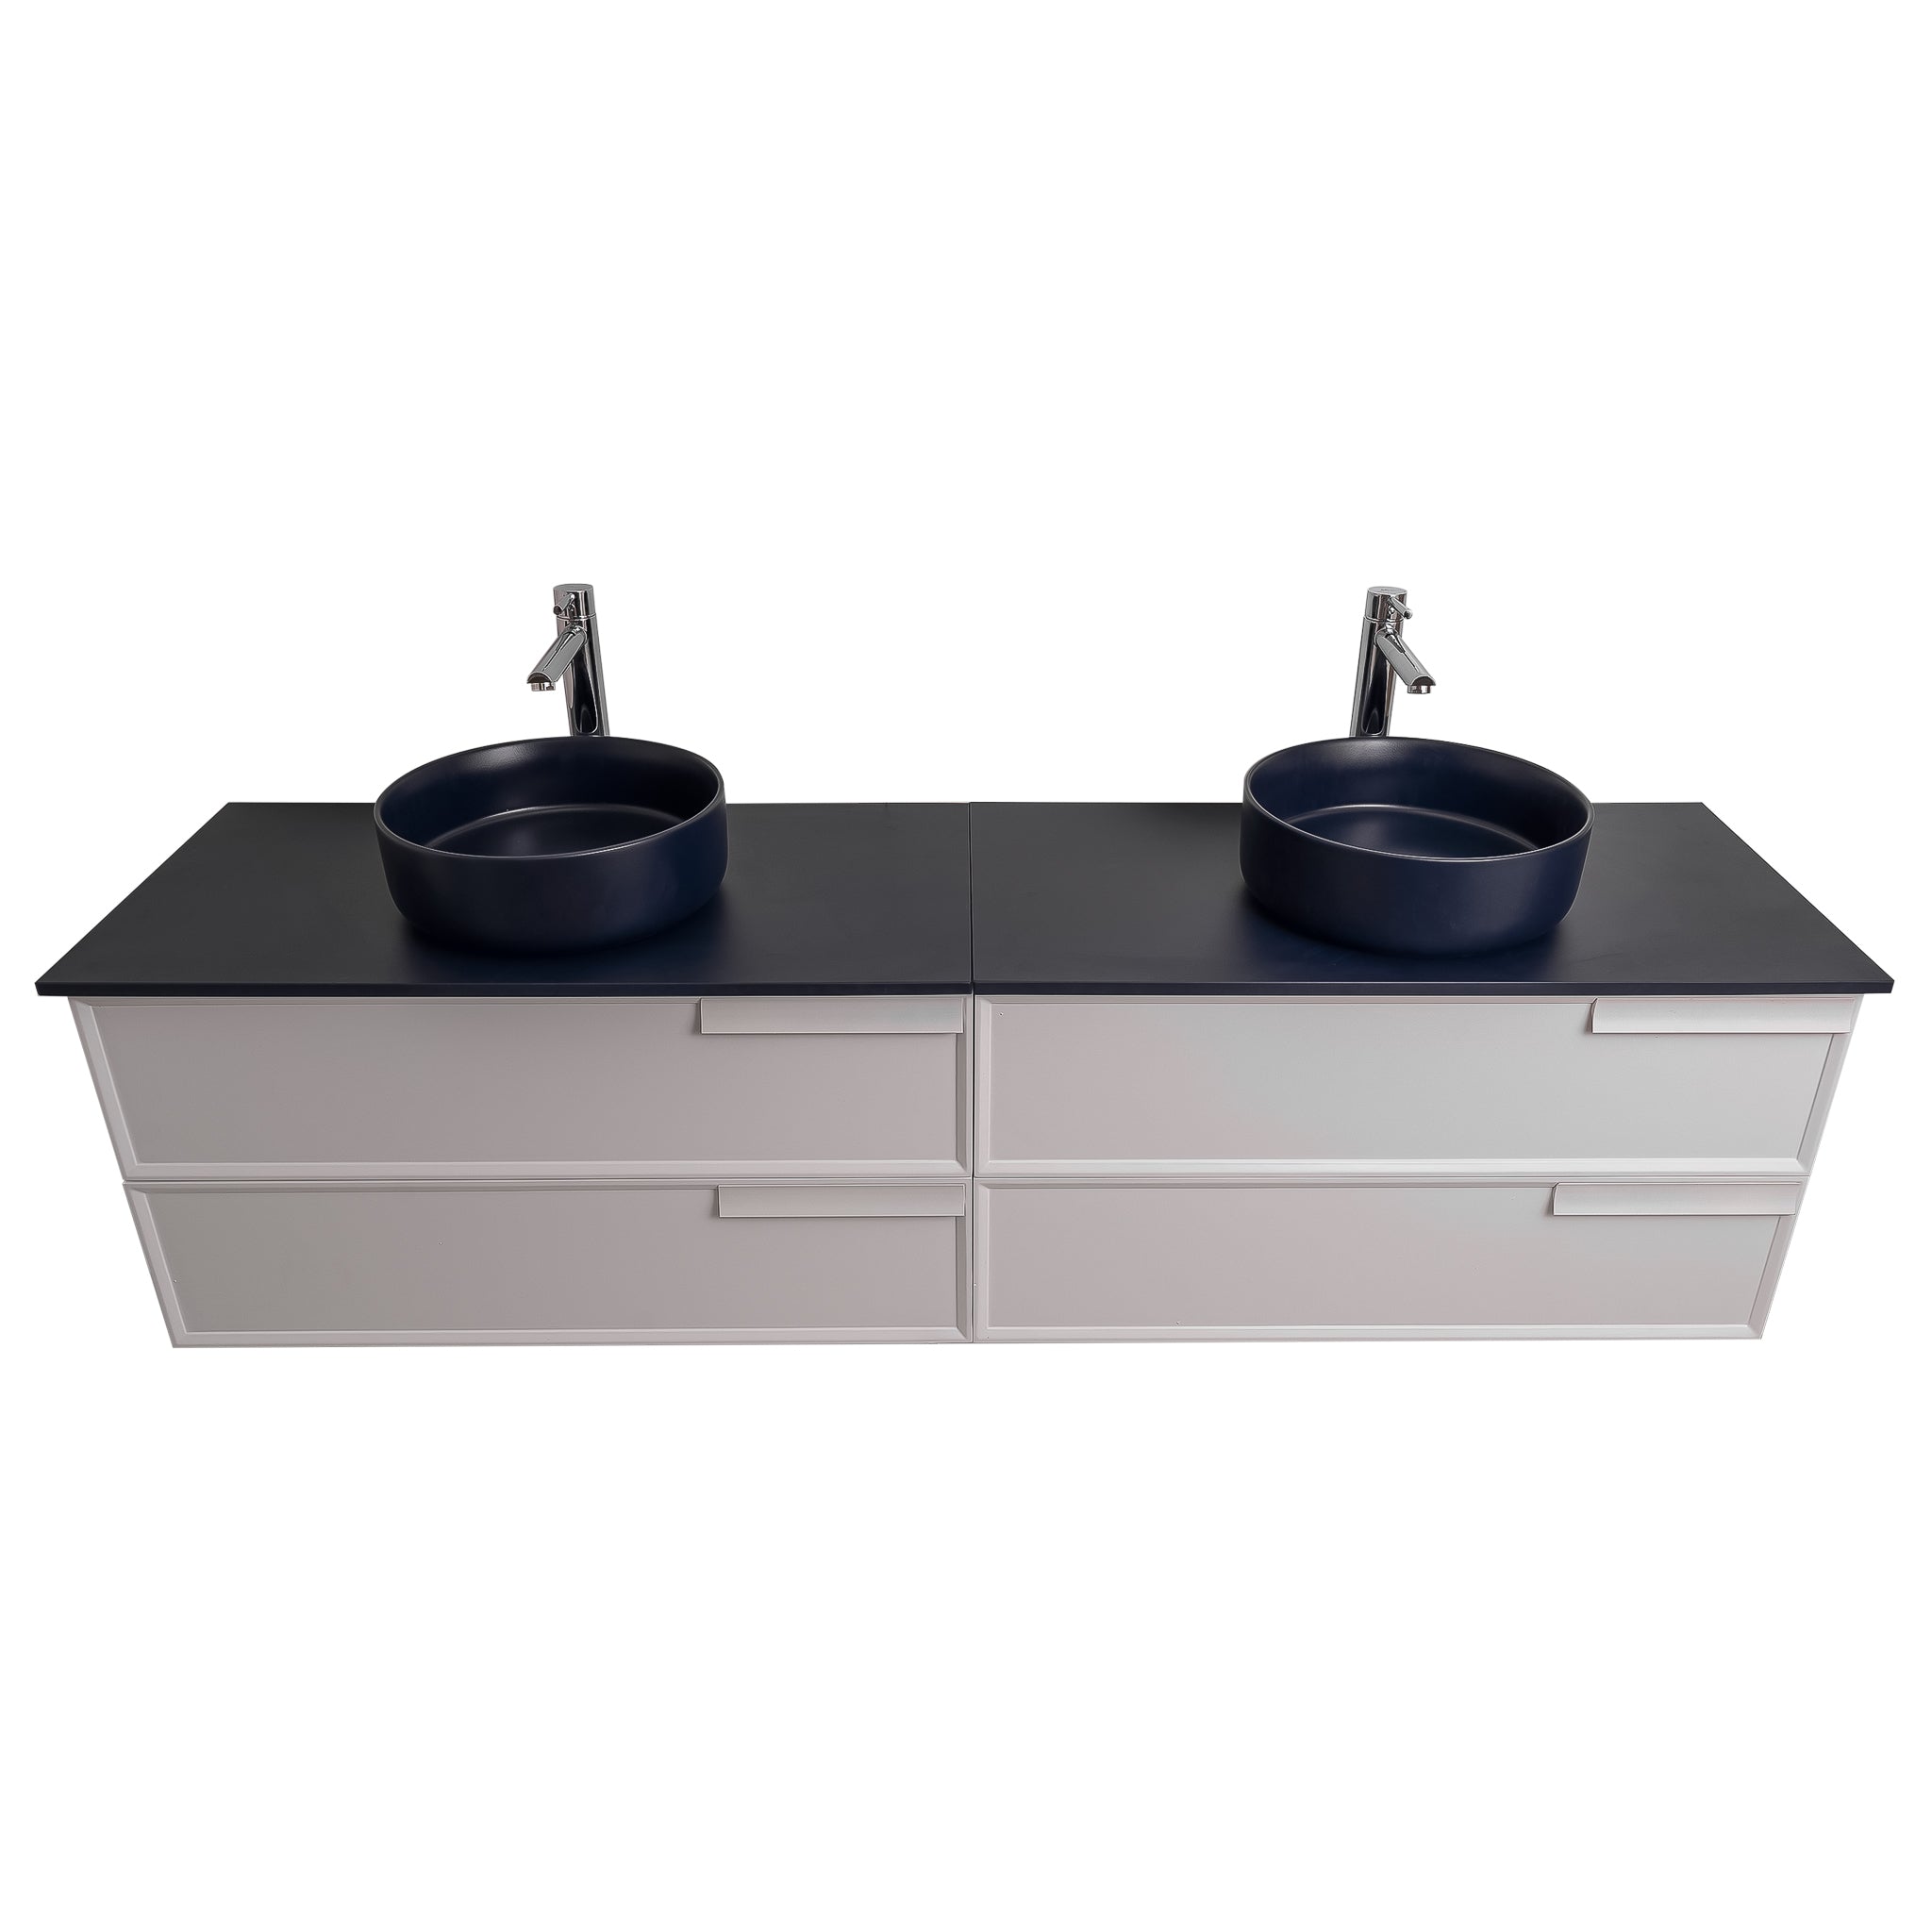 Garda 63 Matte White Cabinet, Ares Navy Blue Top and Two Ares Navy Blue Ceramic Basin, Wall Mounted Modern Vanity Set